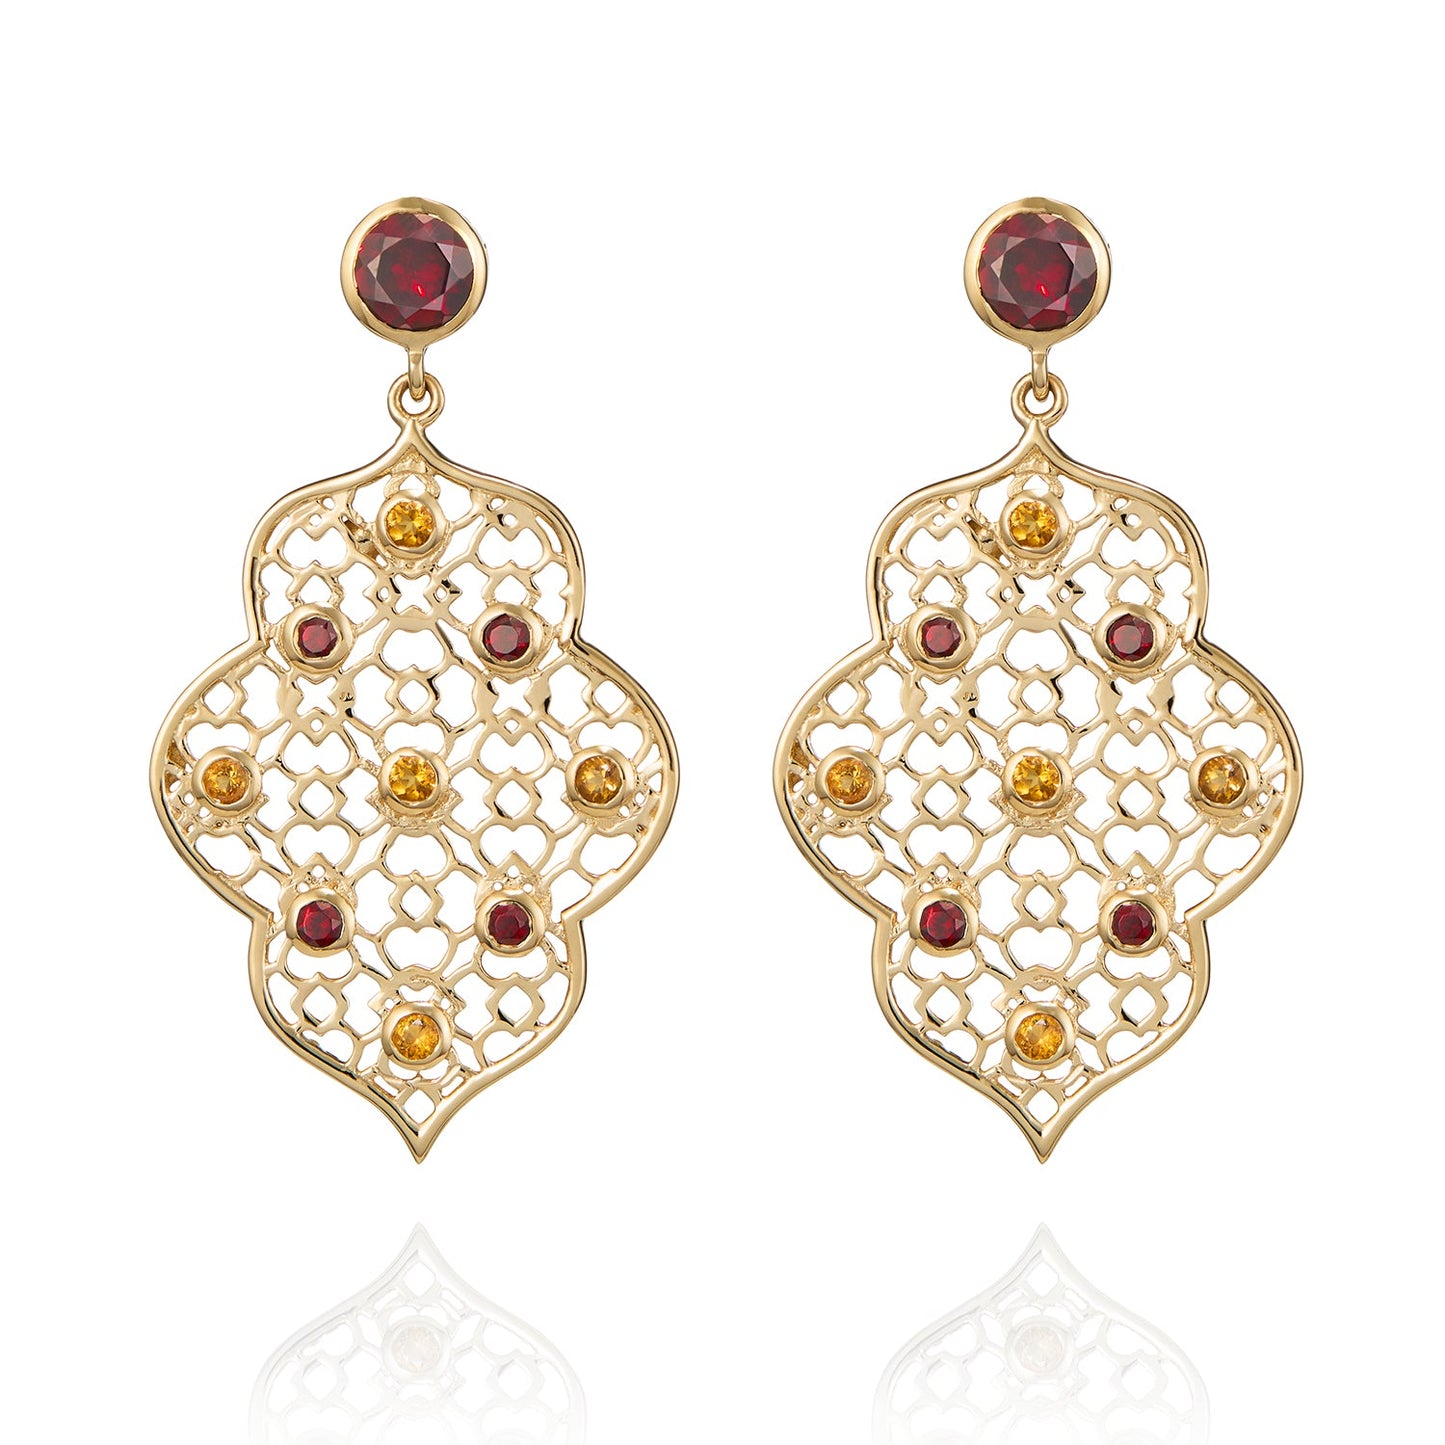 London-made luxury custom gold gemstone jewellery - Gold Filigree Earrings in Garnet and Citrine – Andalusian Collection, Augustine Jewellery, British Jewellers, Gemstone Jewellery, Luxury Jewellery London.